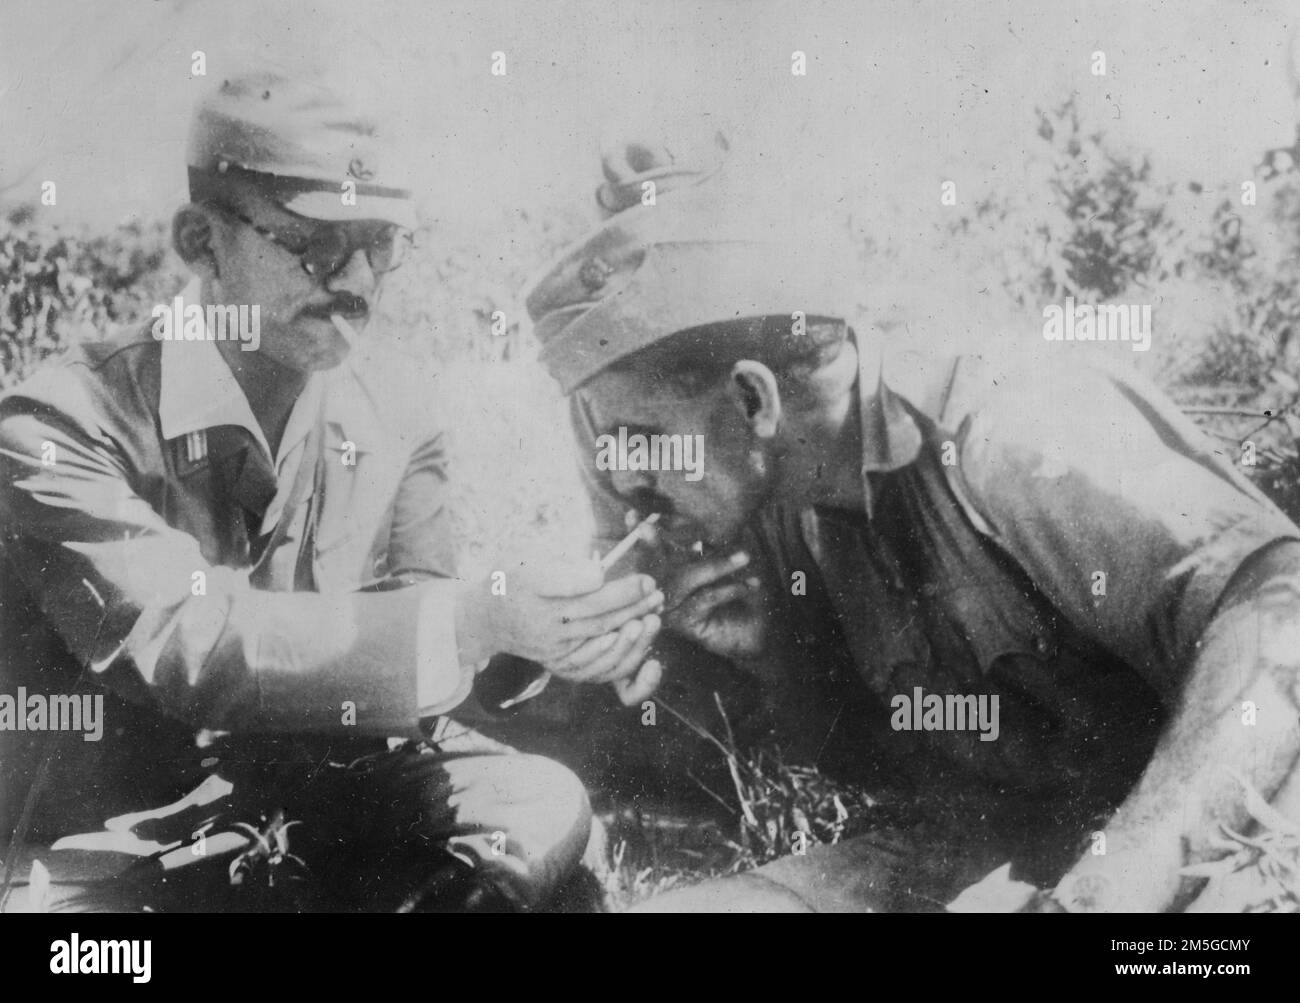 Burma Campaign, 1944-1945. A Japanese officer shares a cigarette with a soldier of the pro-Japanese Indian National Army during a brief rest in their ultimately ill-fated advance towards India, April 1944. Stock Photo